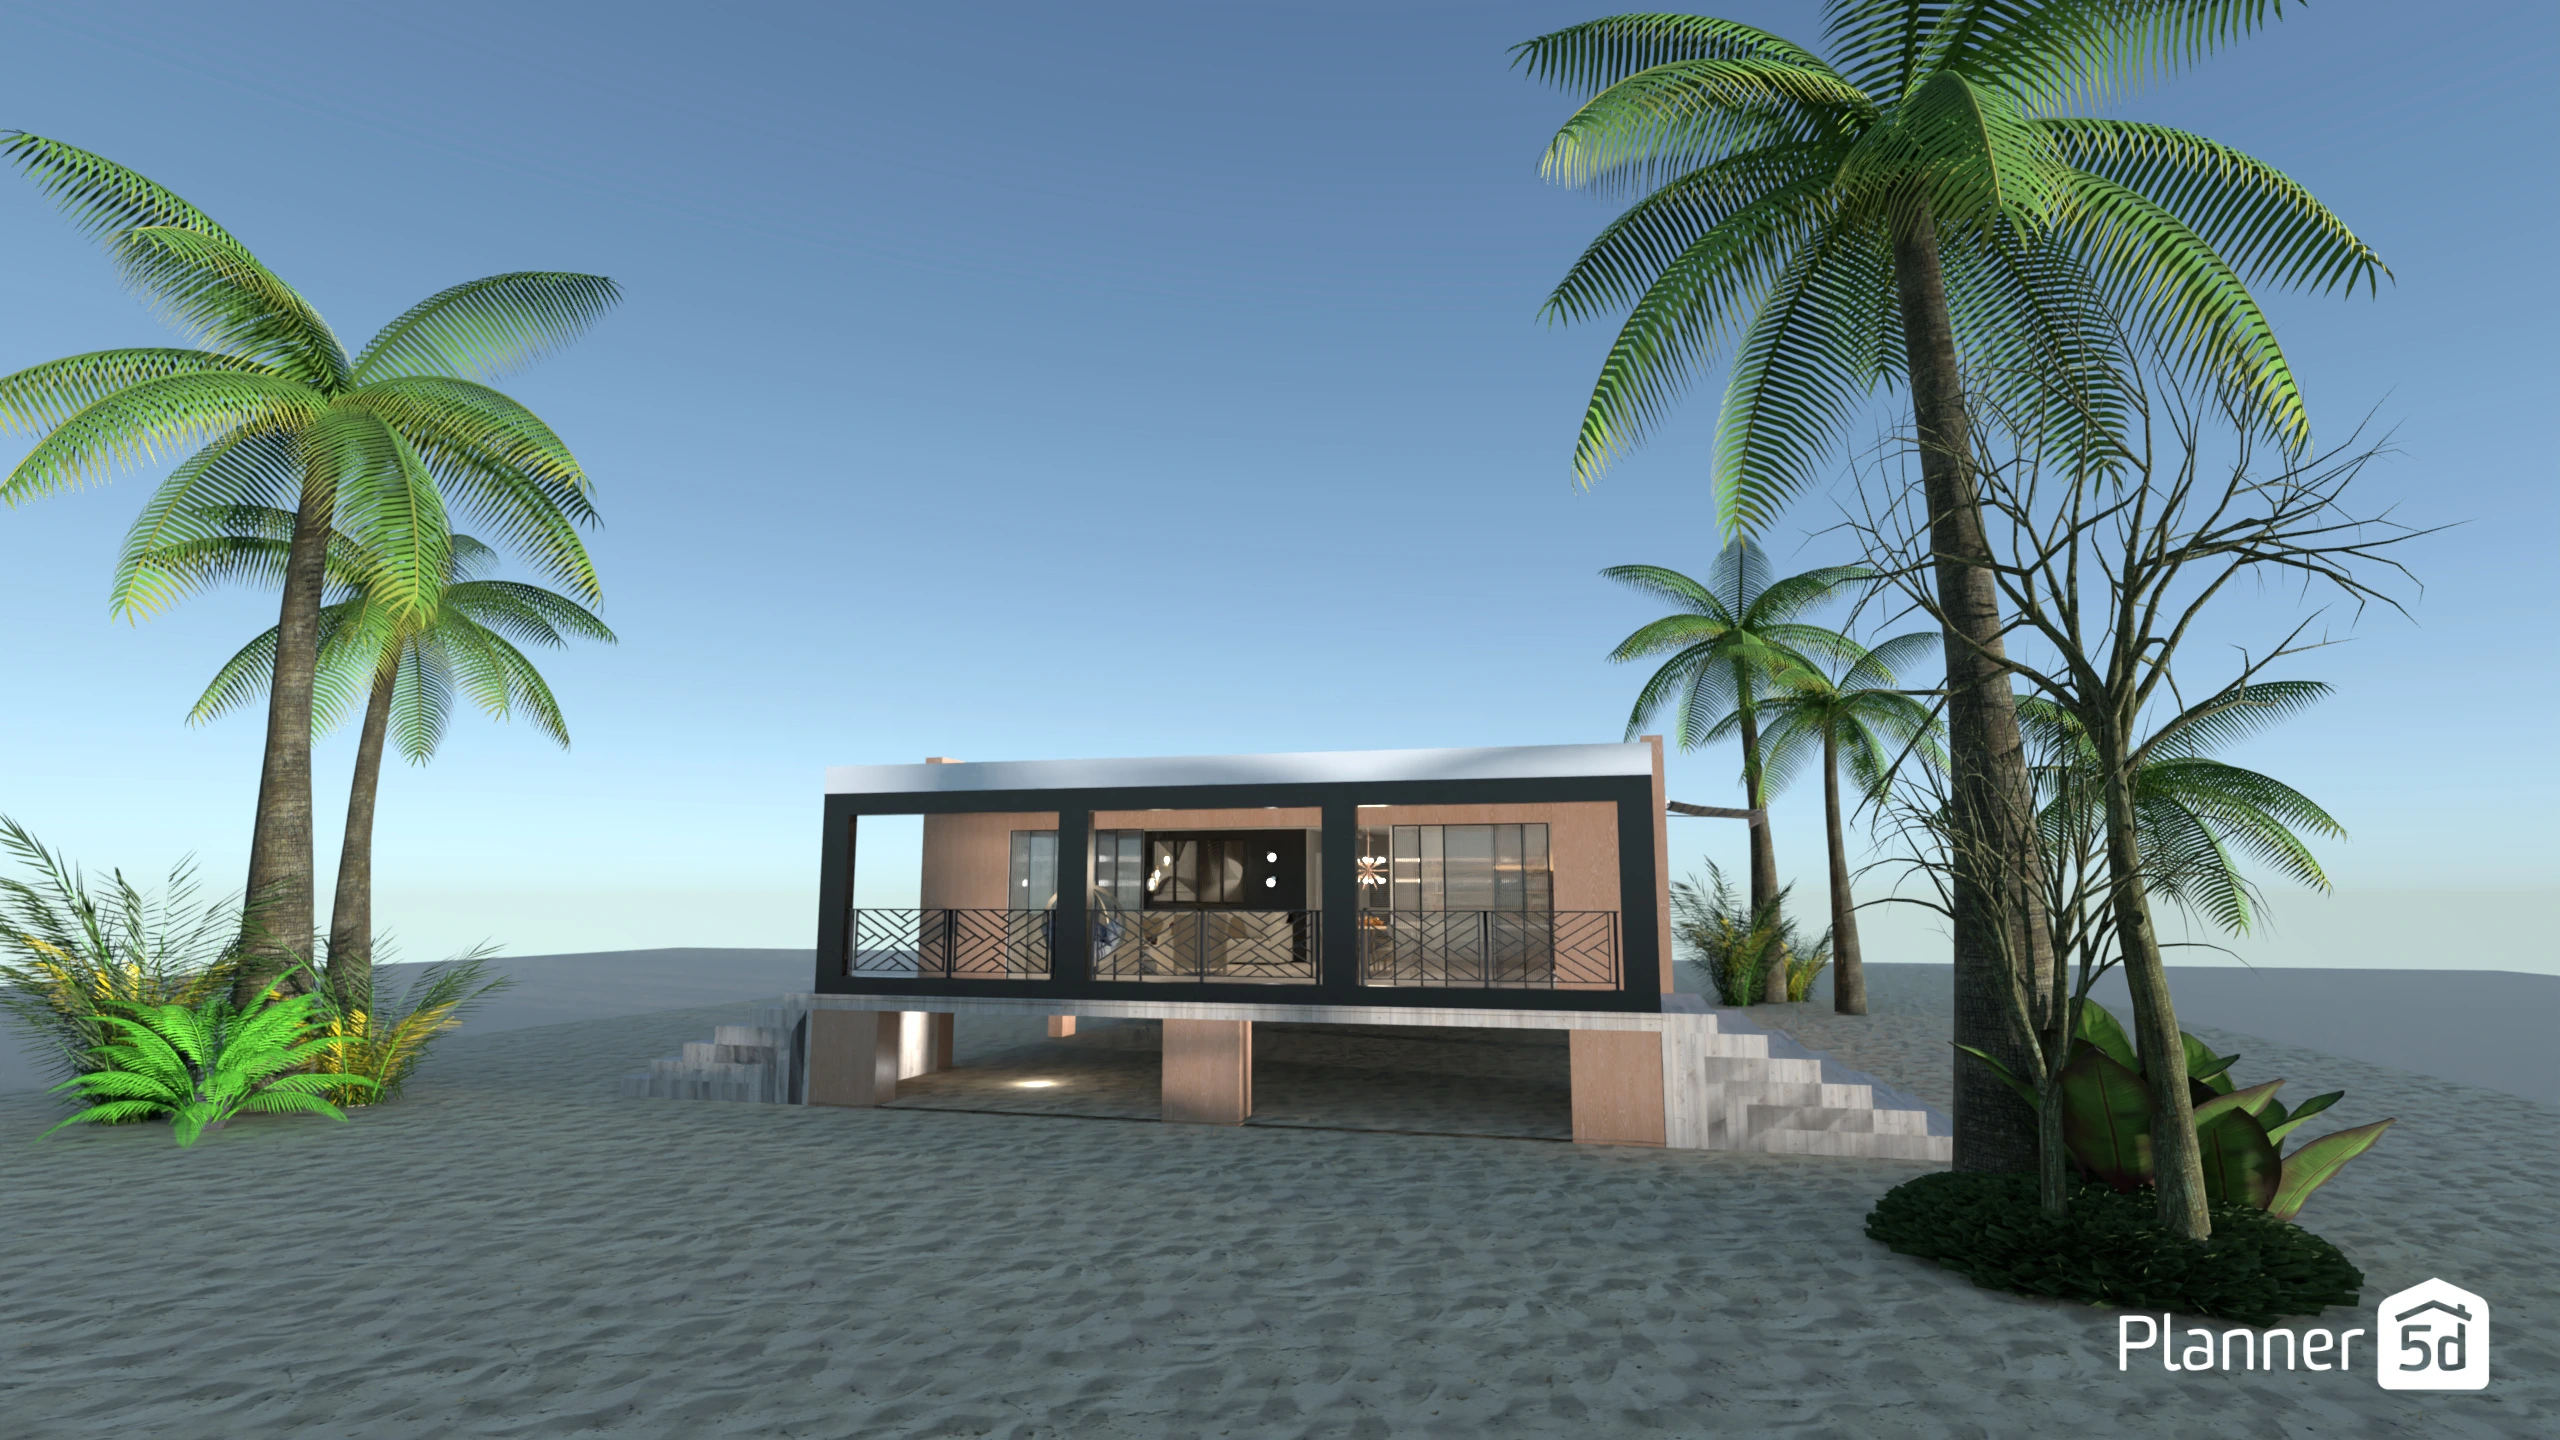 House on the sand 136143 by Micaela Maccaferri image